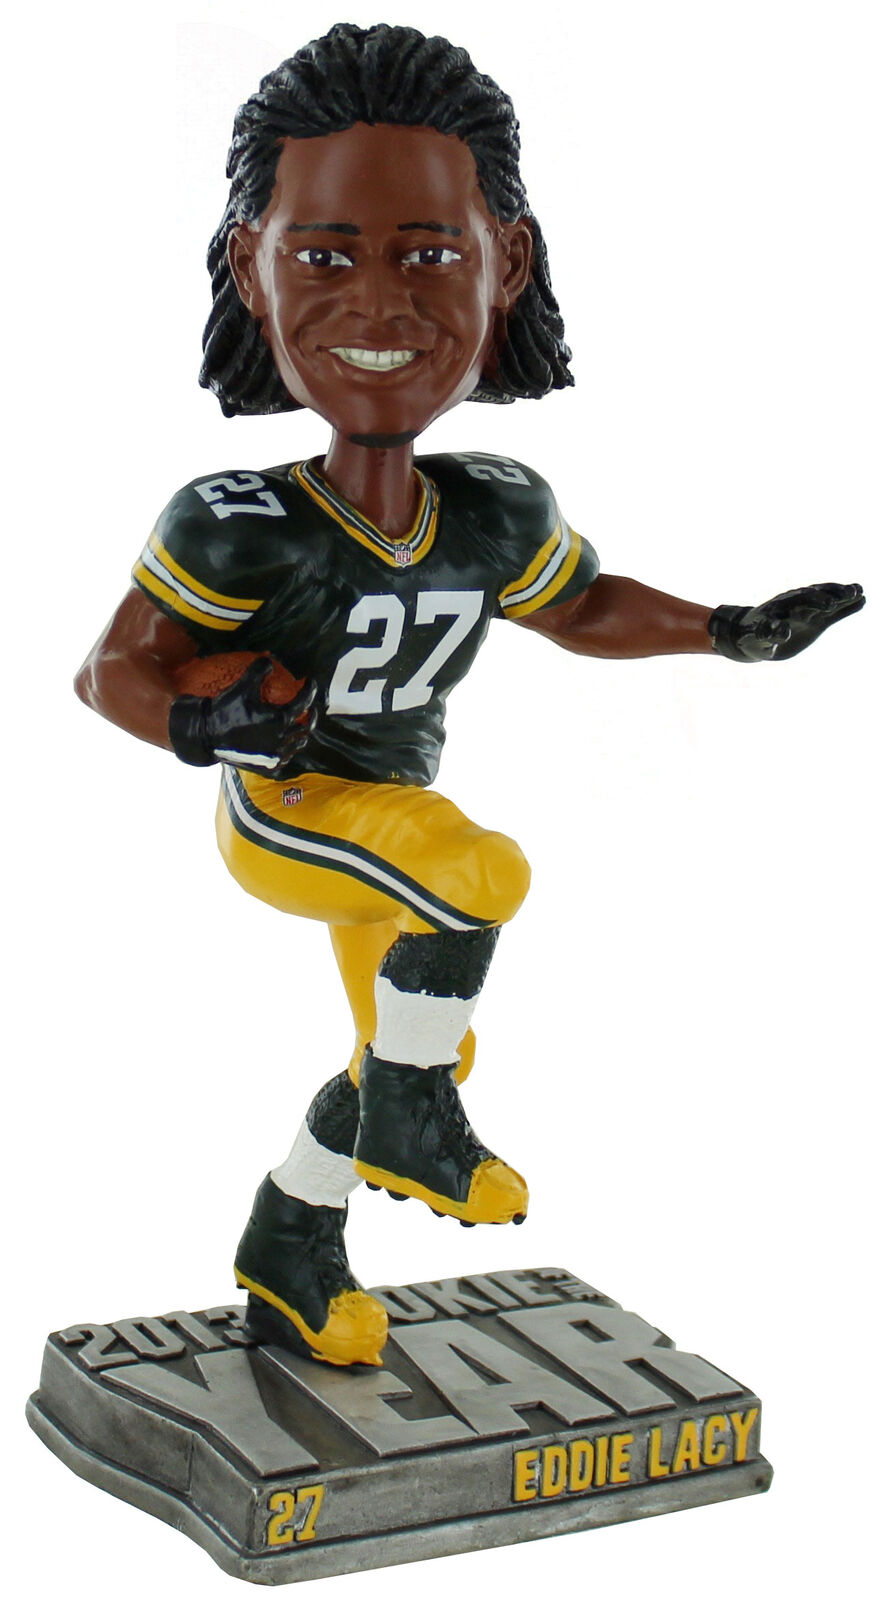 Green Bay Packers Eddie Lacy #27 2013 Rookie of the Year Bobblehead